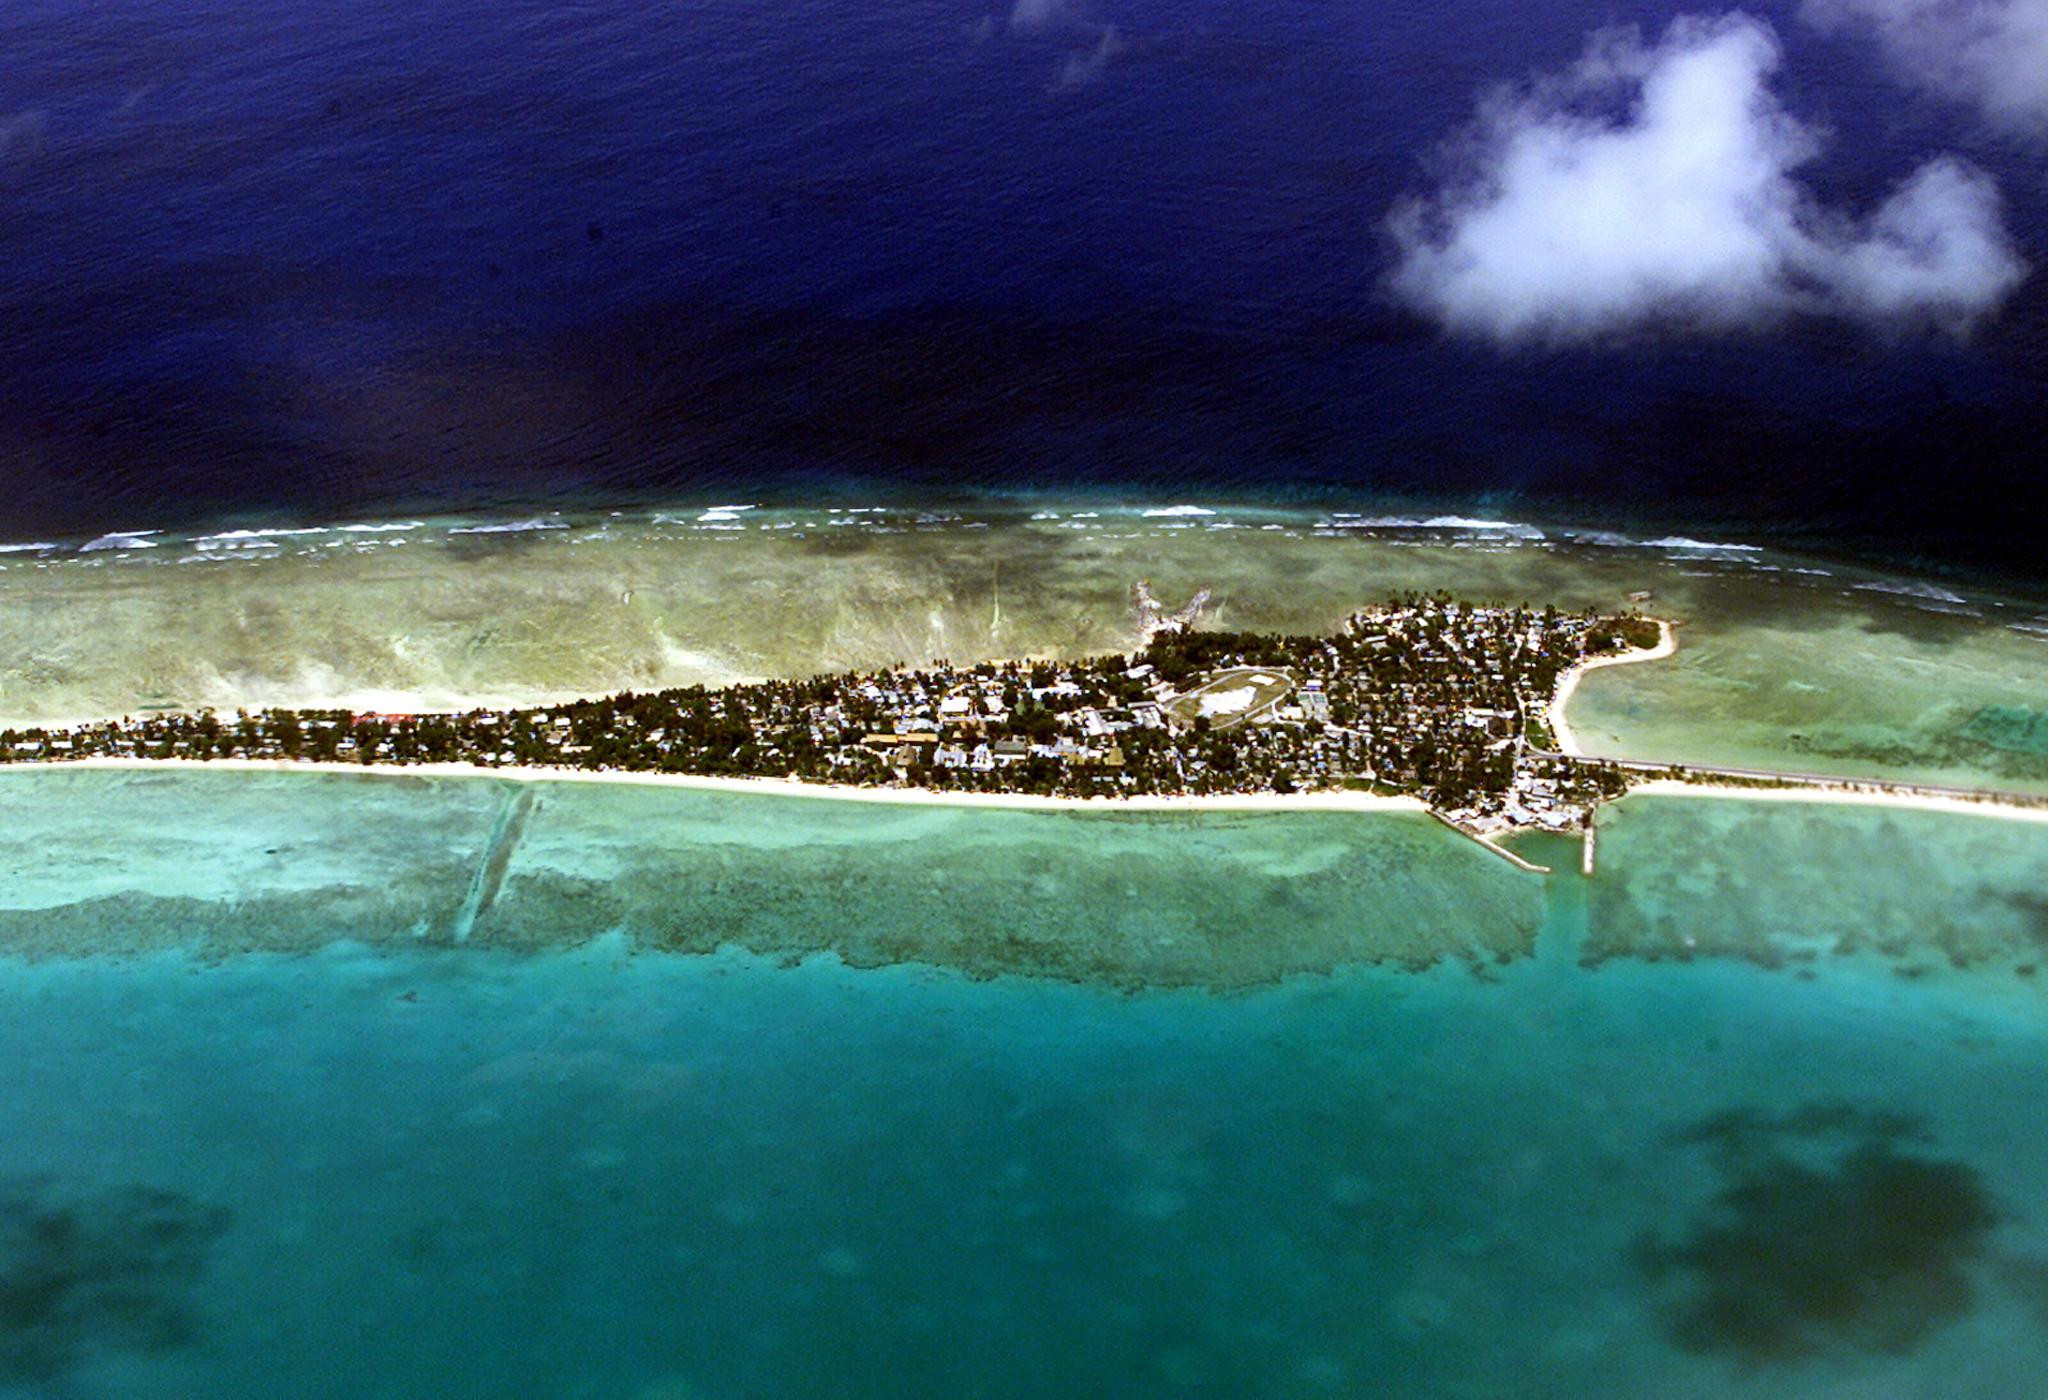 Kiribati's islands are low, narrow and flat so they are in severe danger of rising water ©Getty Images